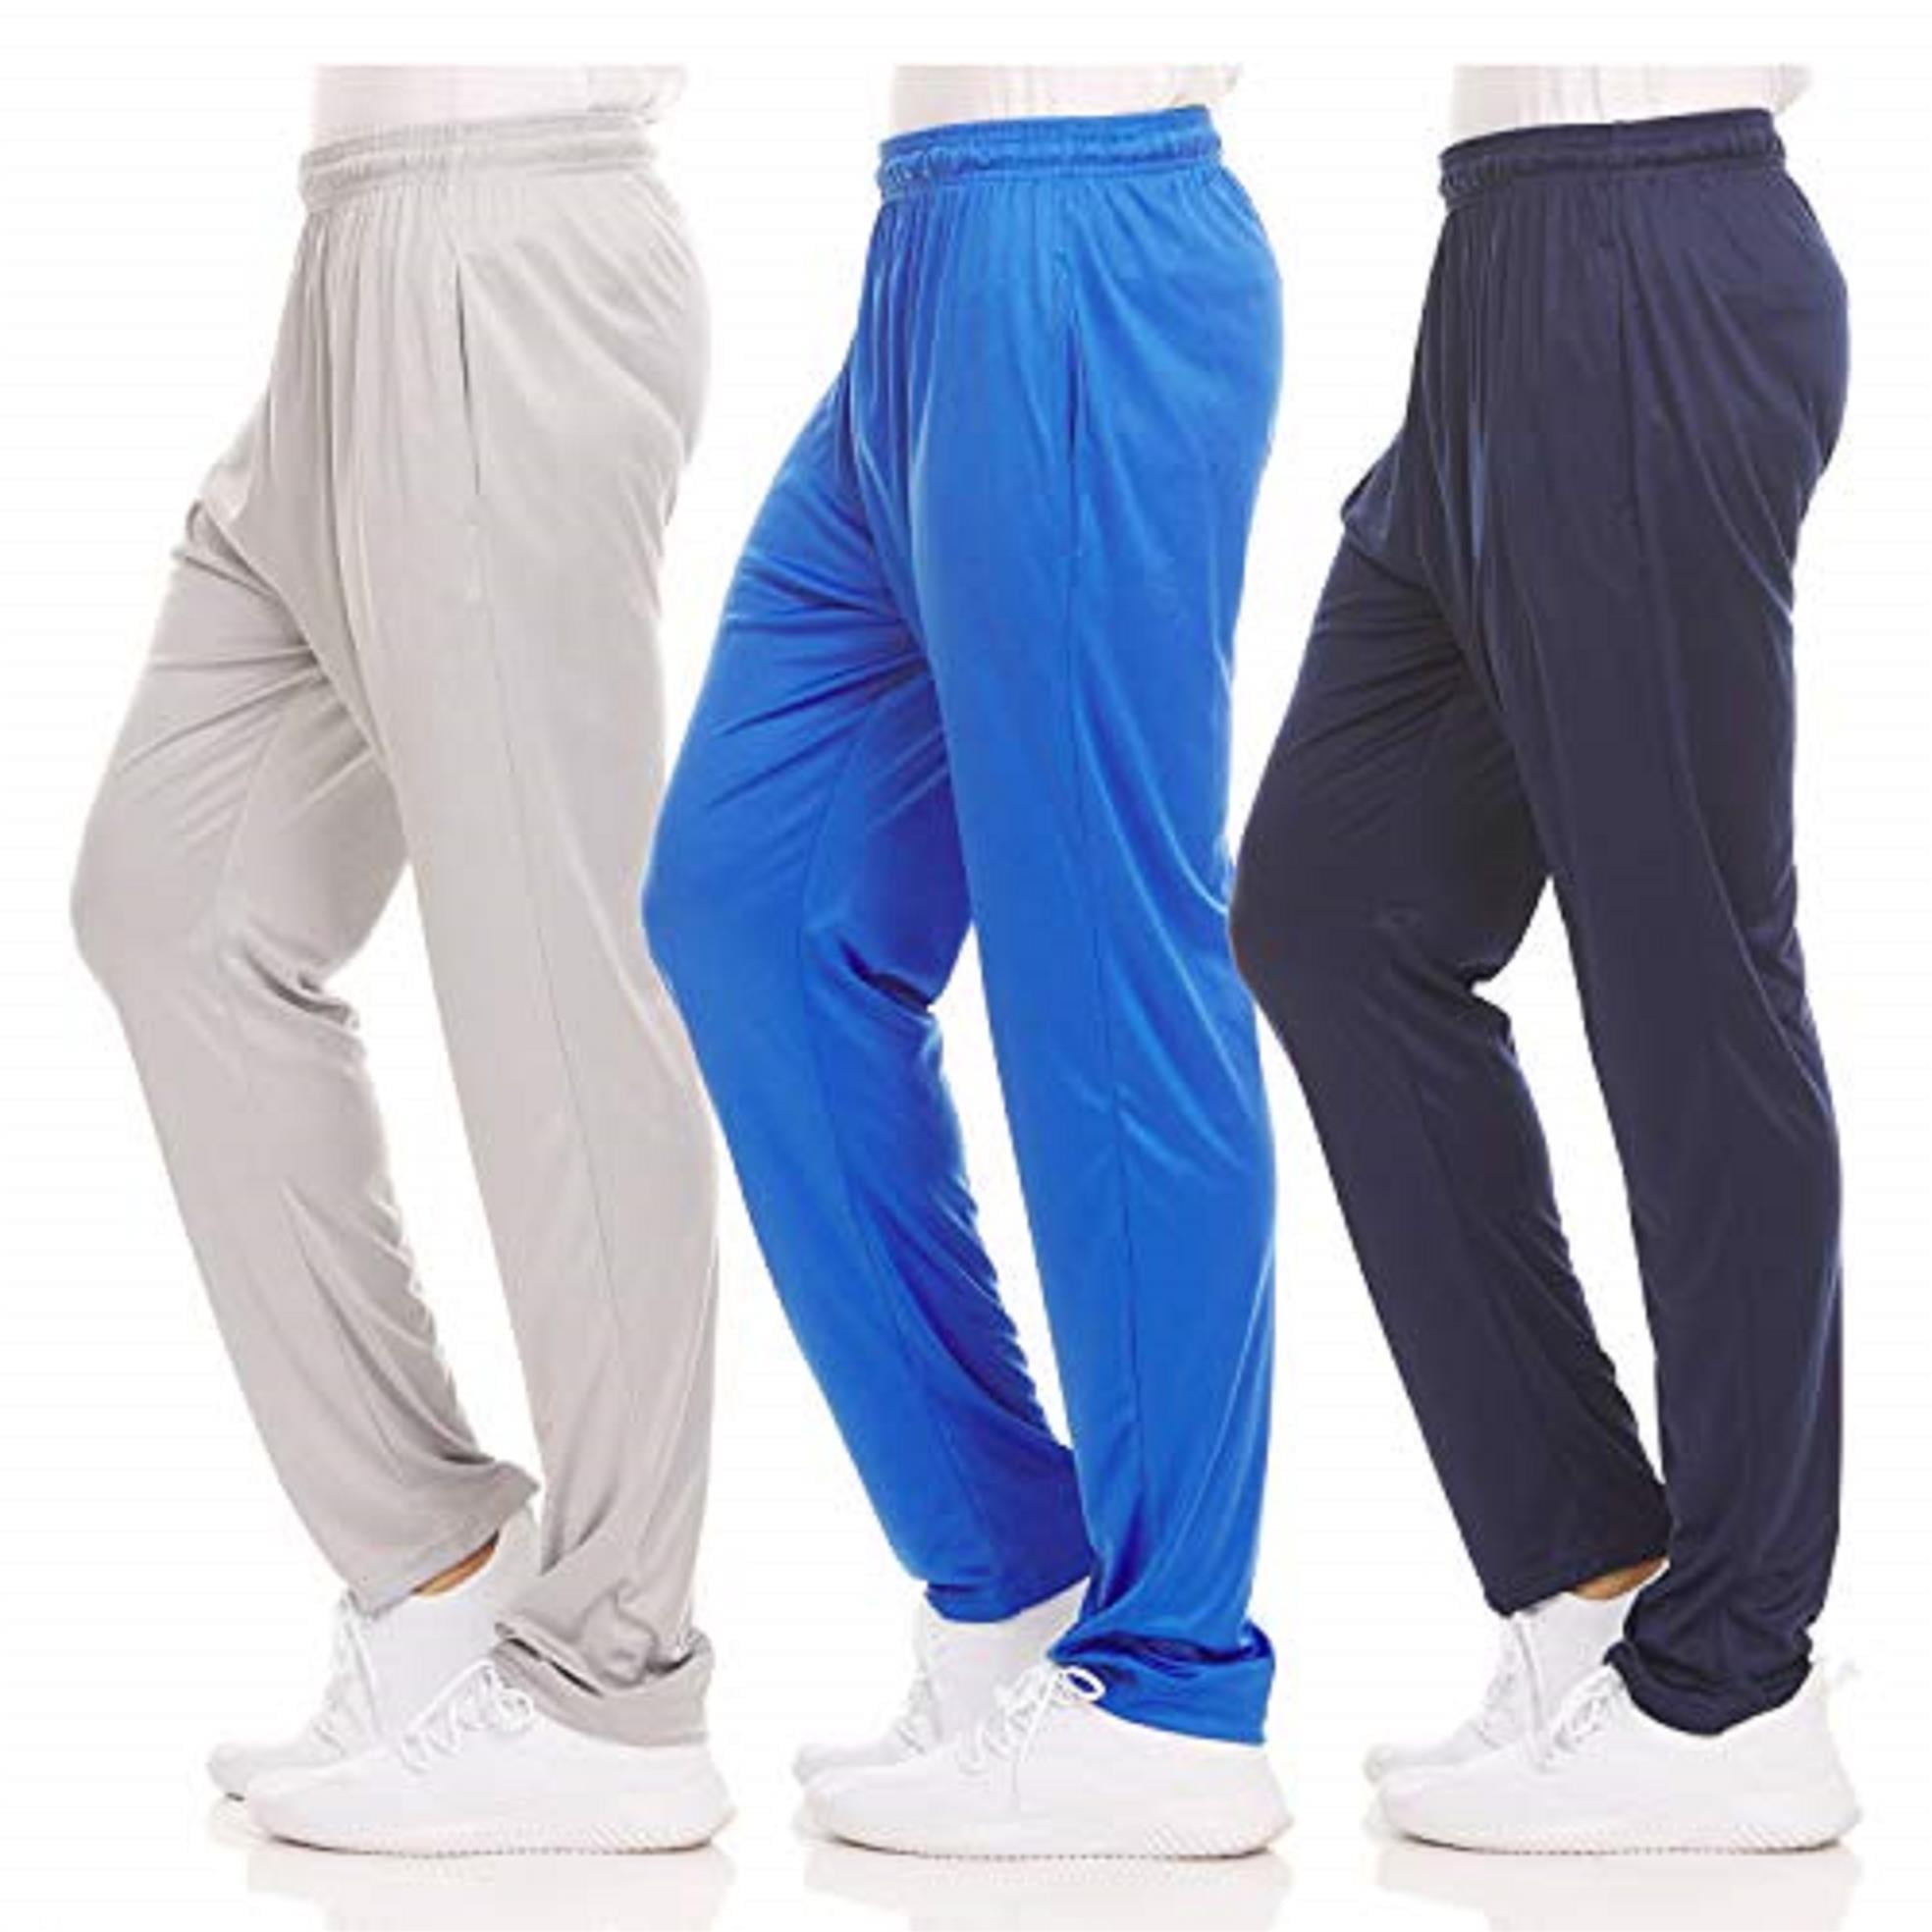 Dri-Fit Pant 3 Pack-Moisture Wicking, High Performance, Comfy Spandex-Poly  Blend (Up To Size 3XL)